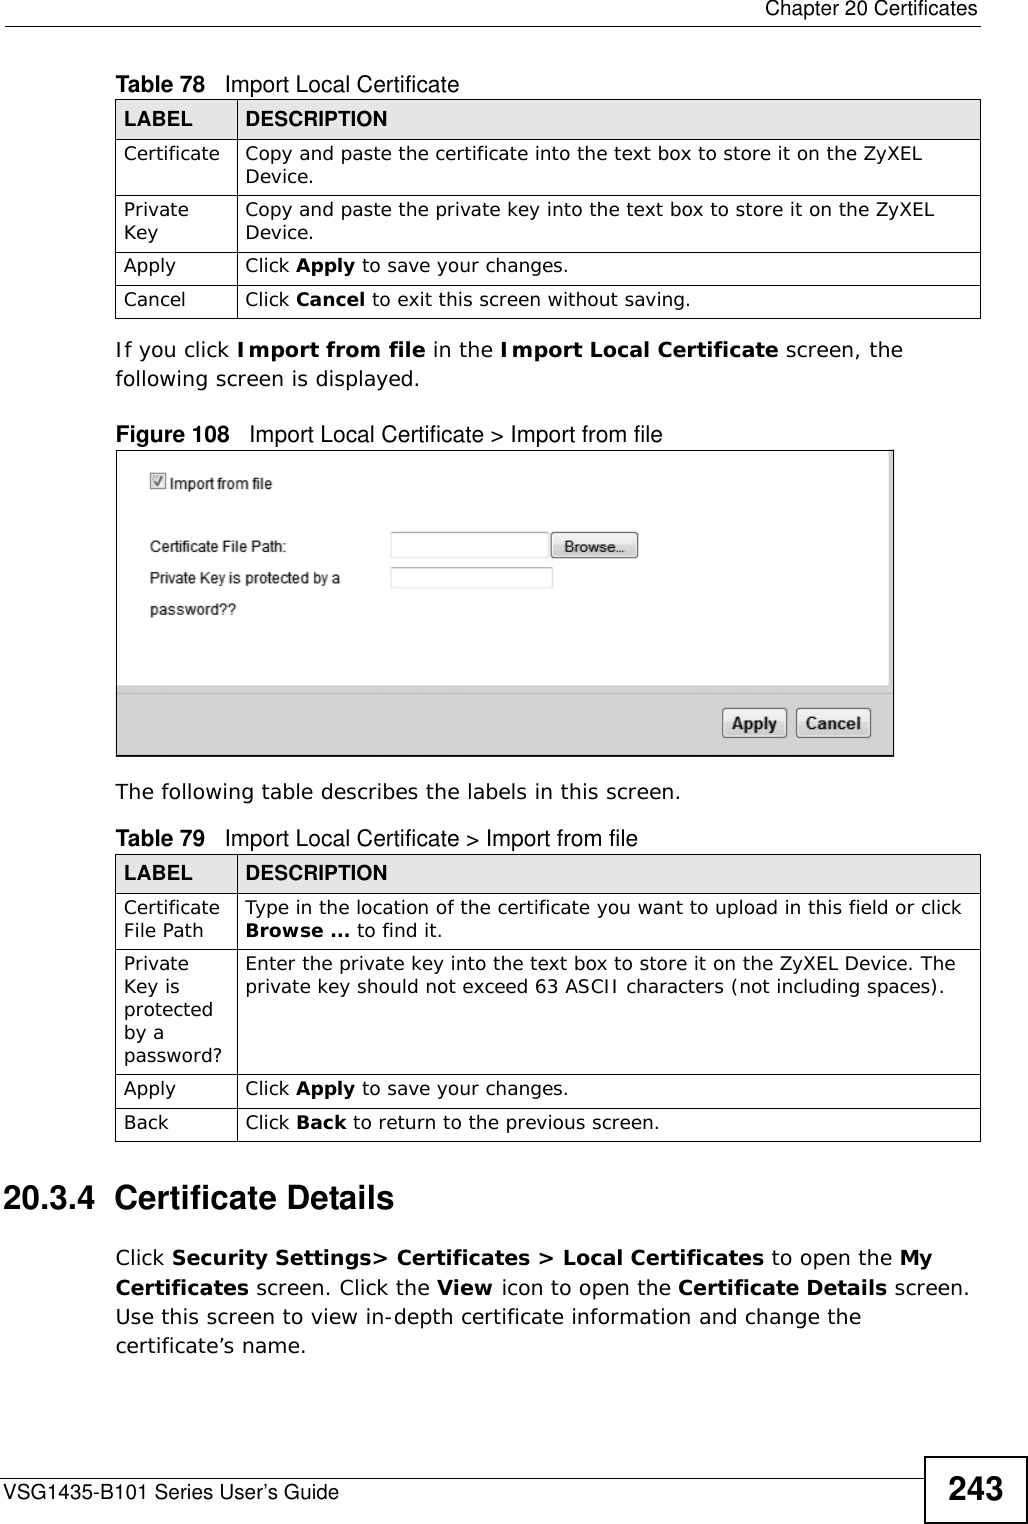  Chapter 20 CertificatesVSG1435-B101 Series User’s Guide 243If you click Import from file in the Import Local Certificate screen, the following screen is displayed.Figure 108   Import Local Certificate &gt; Import from fileThe following table describes the labels in this screen. 20.3.4  Certificate Details Click Security Settings&gt; Certificates &gt; Local Certificates to open the My Certificates screen. Click the View icon to open the Certificate Details screen. Use this screen to view in-depth certificate information and change the certificate’s name. Certificate Copy and paste the certificate into the text box to store it on the ZyXEL Device.Private Key Copy and paste the private key into the text box to store it on the ZyXEL Device. Apply Click Apply to save your changes.Cancel Click Cancel to exit this screen without saving.Table 79   Import Local Certificate &gt; Import from fileLABEL DESCRIPTIONCertificate File Path Type in the location of the certificate you want to upload in this field or click Browse ... to find it. Private Key is protected by a password?Enter the private key into the text box to store it on the ZyXEL Device. The private key should not exceed 63 ASCII characters (not including spaces). Apply Click Apply to save your changes.Back Click Back to return to the previous screen.Table 78   Import Local CertificateLABEL DESCRIPTION